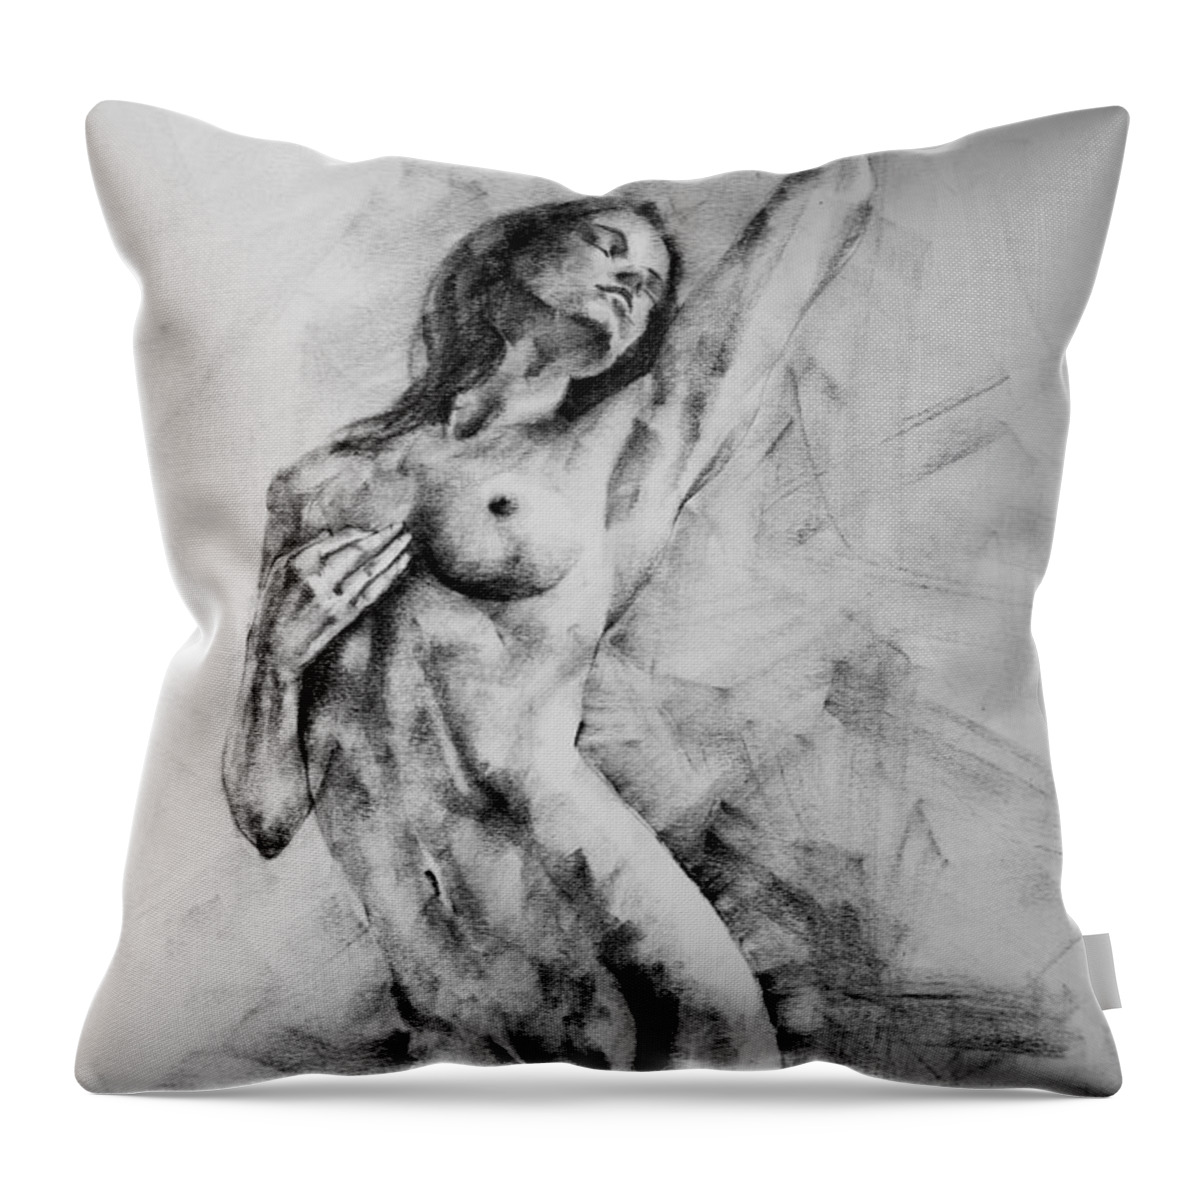 Erotic Throw Pillow featuring the drawing Page 12 by Dimitar Hristov